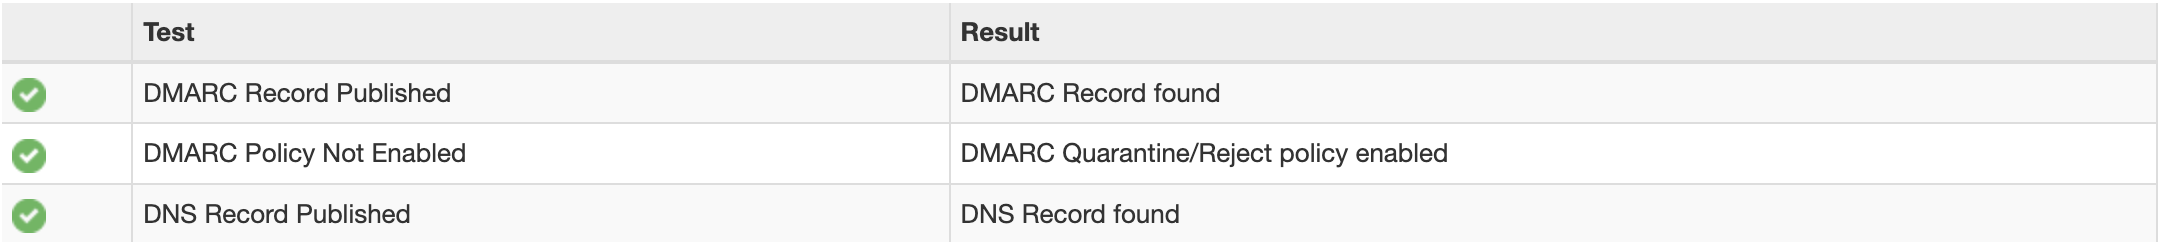 DMARC found.png